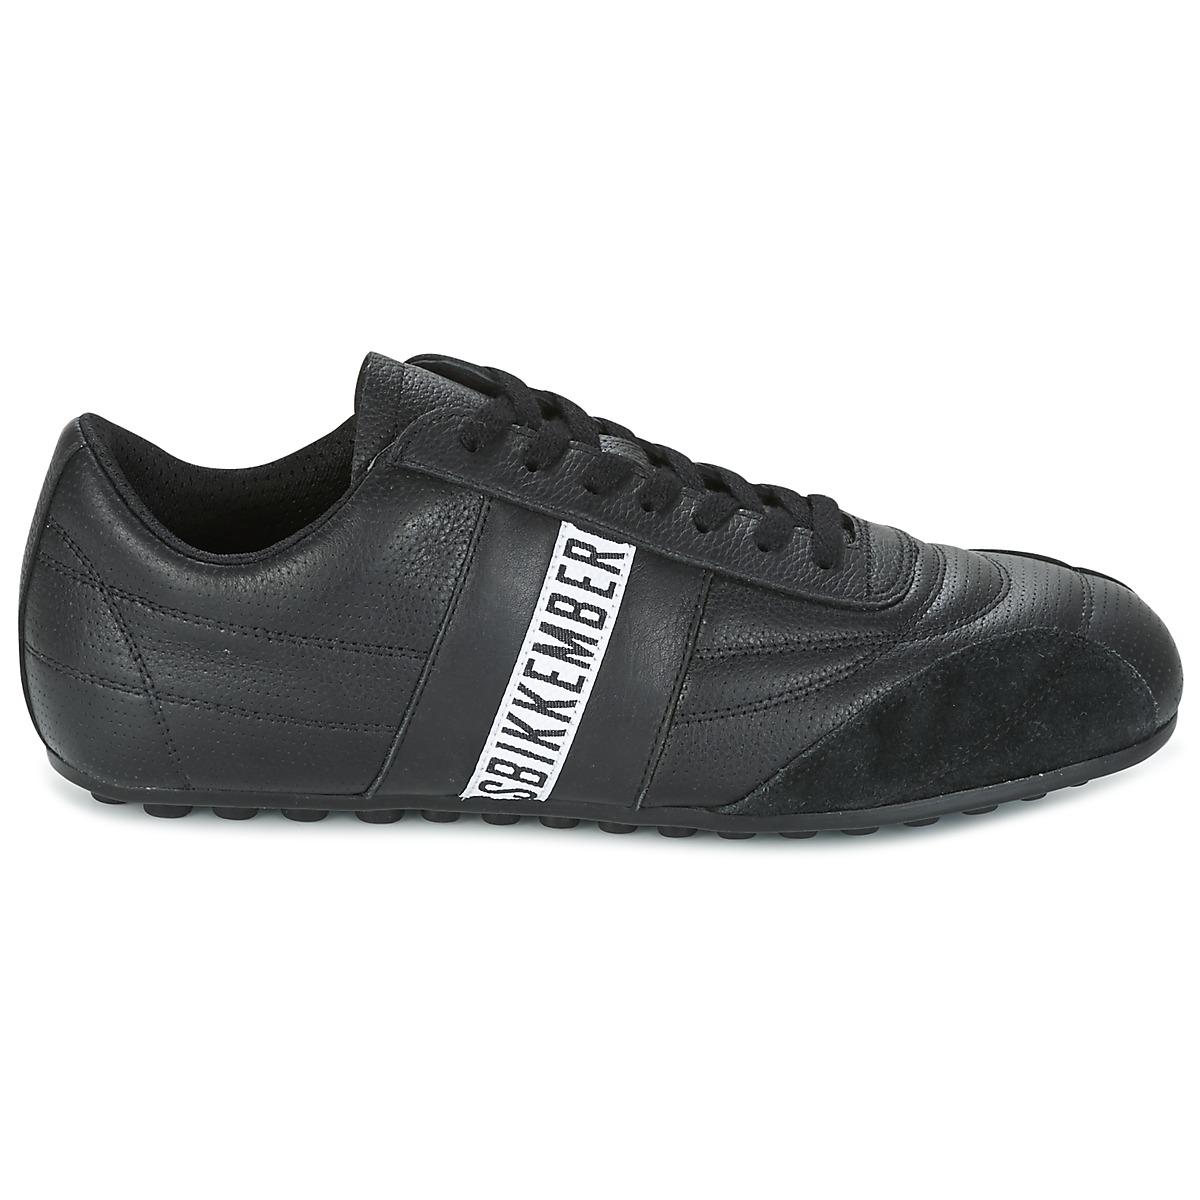 Bikkembergs Soccer 106 Leather Shoes (trainers) in Black for Men - Lyst